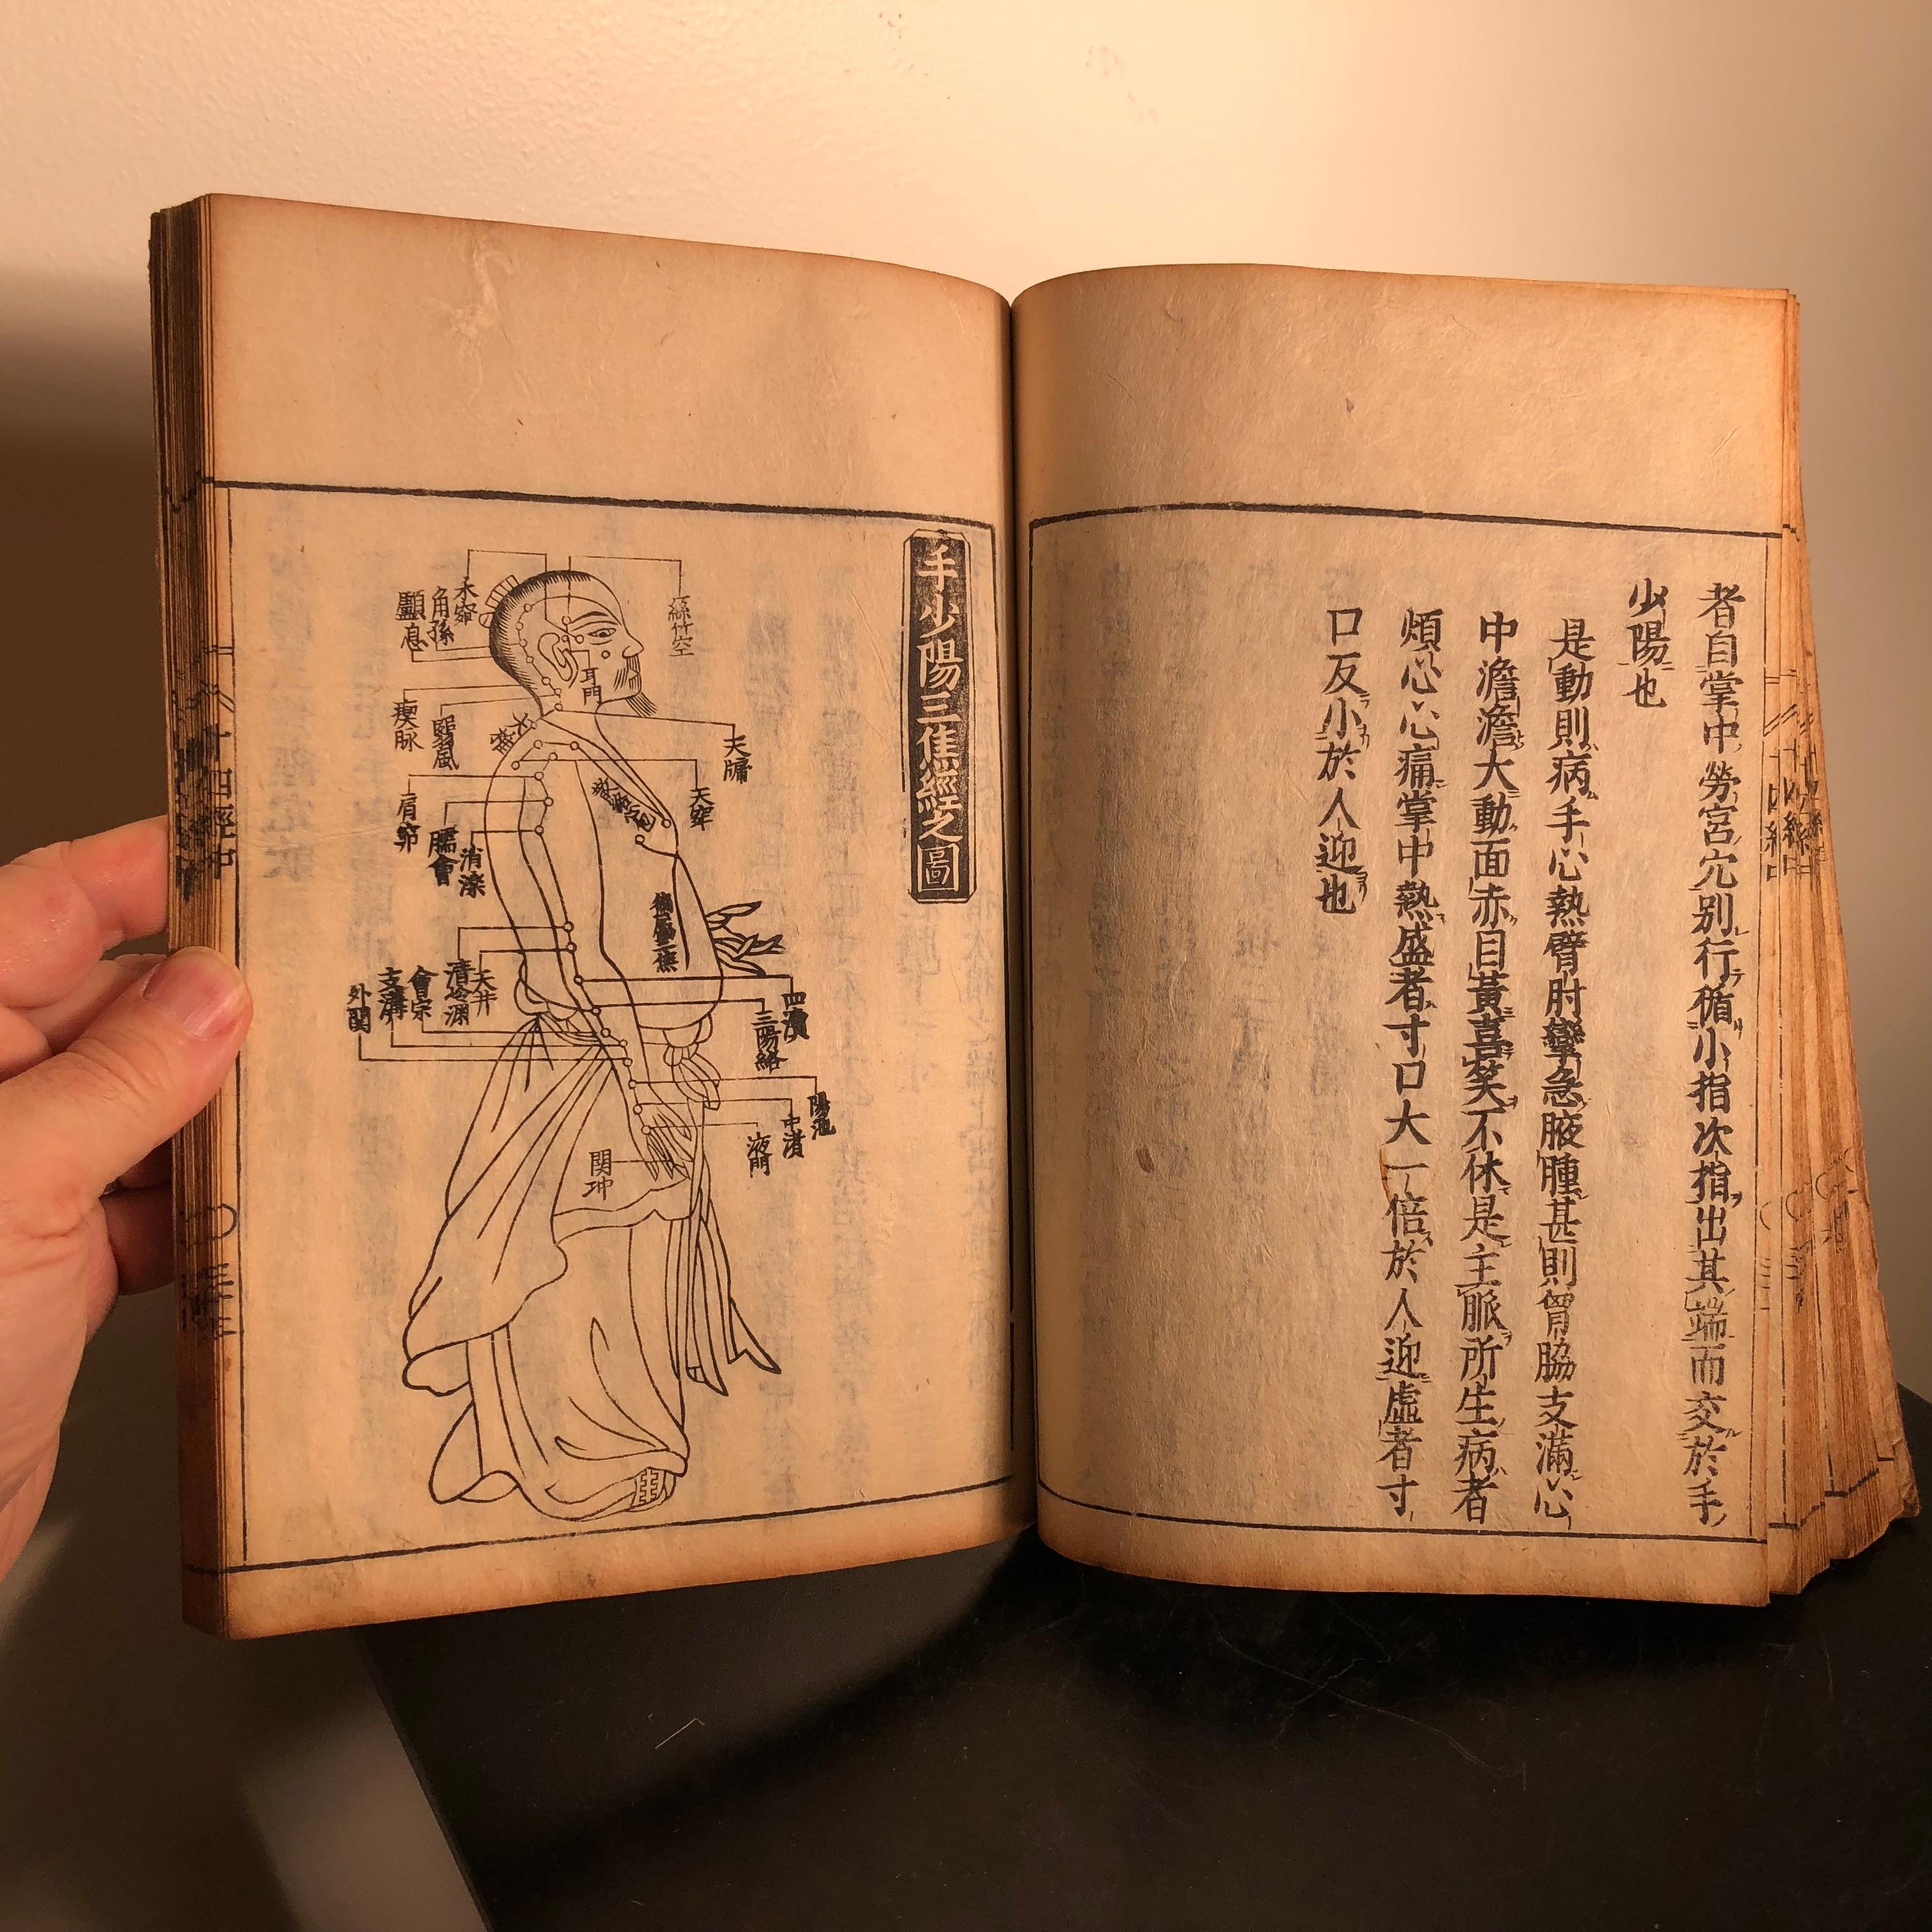 Important Acupuncture Japanese Antique Woodblock Guide Book, 19th Century Prints 6